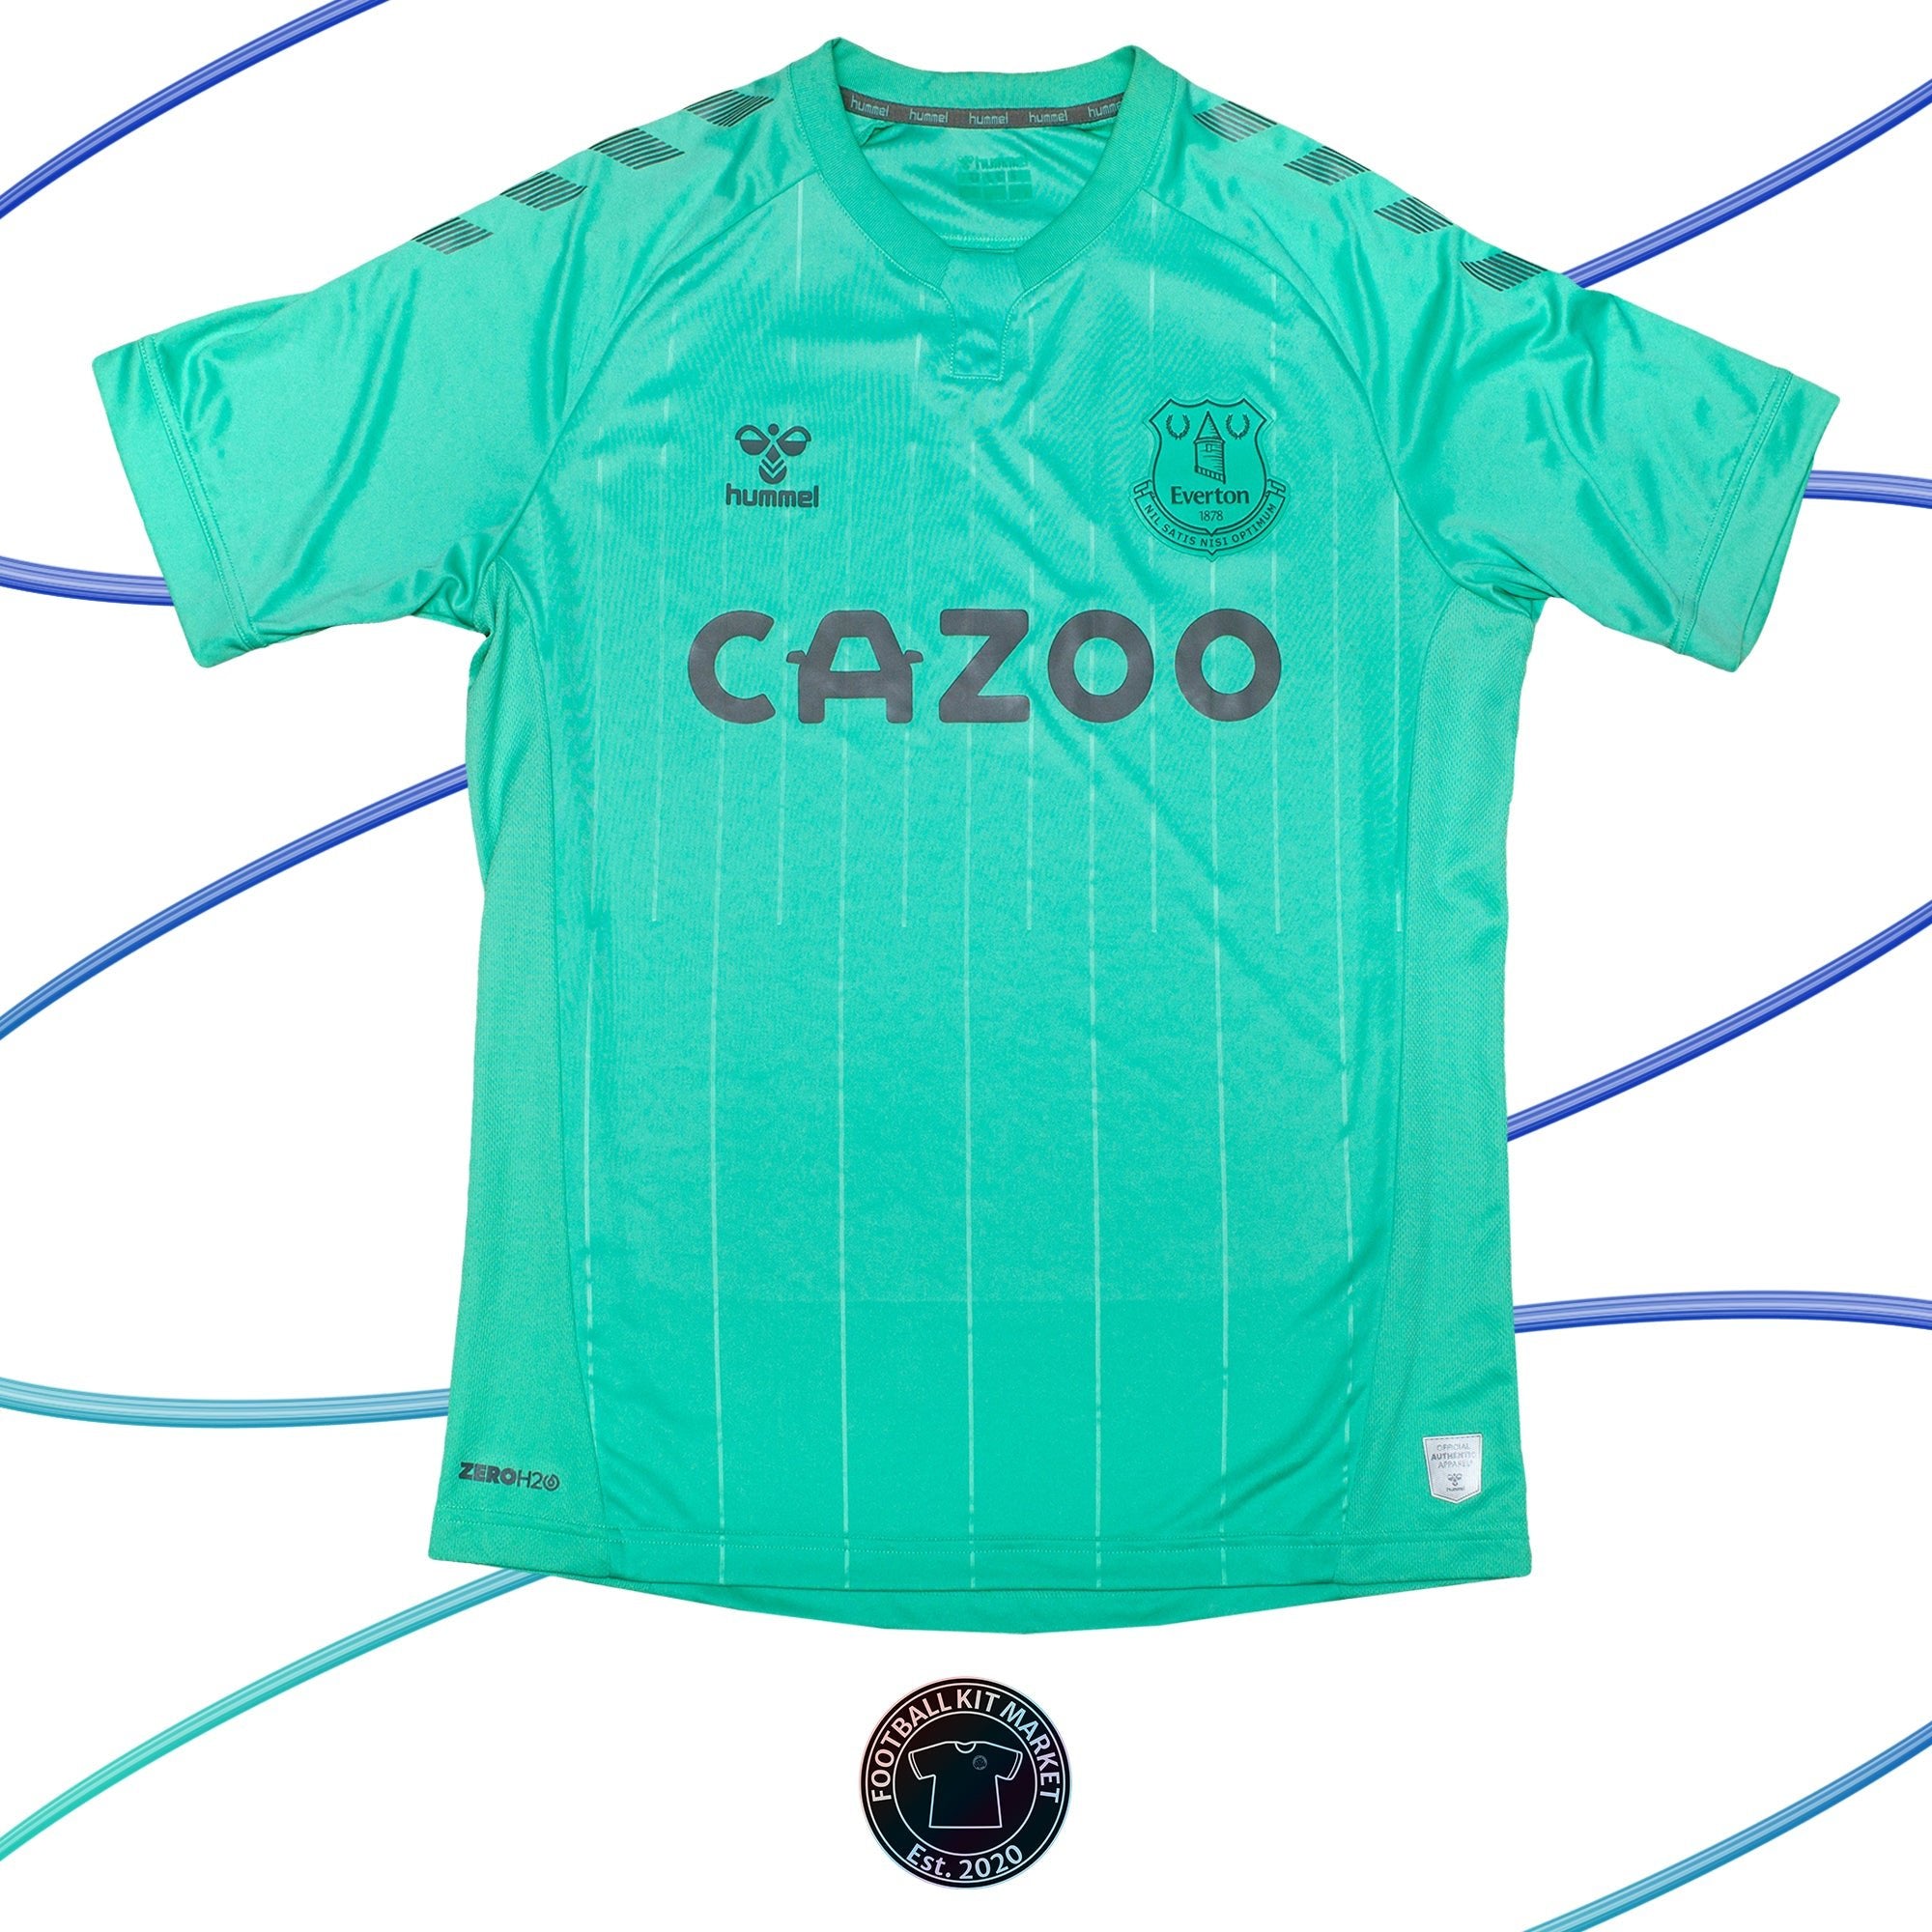 Genuine EVERTON 3rd (2020-2021) - HUMMEL (XL) - Product Image from Football Kit Market